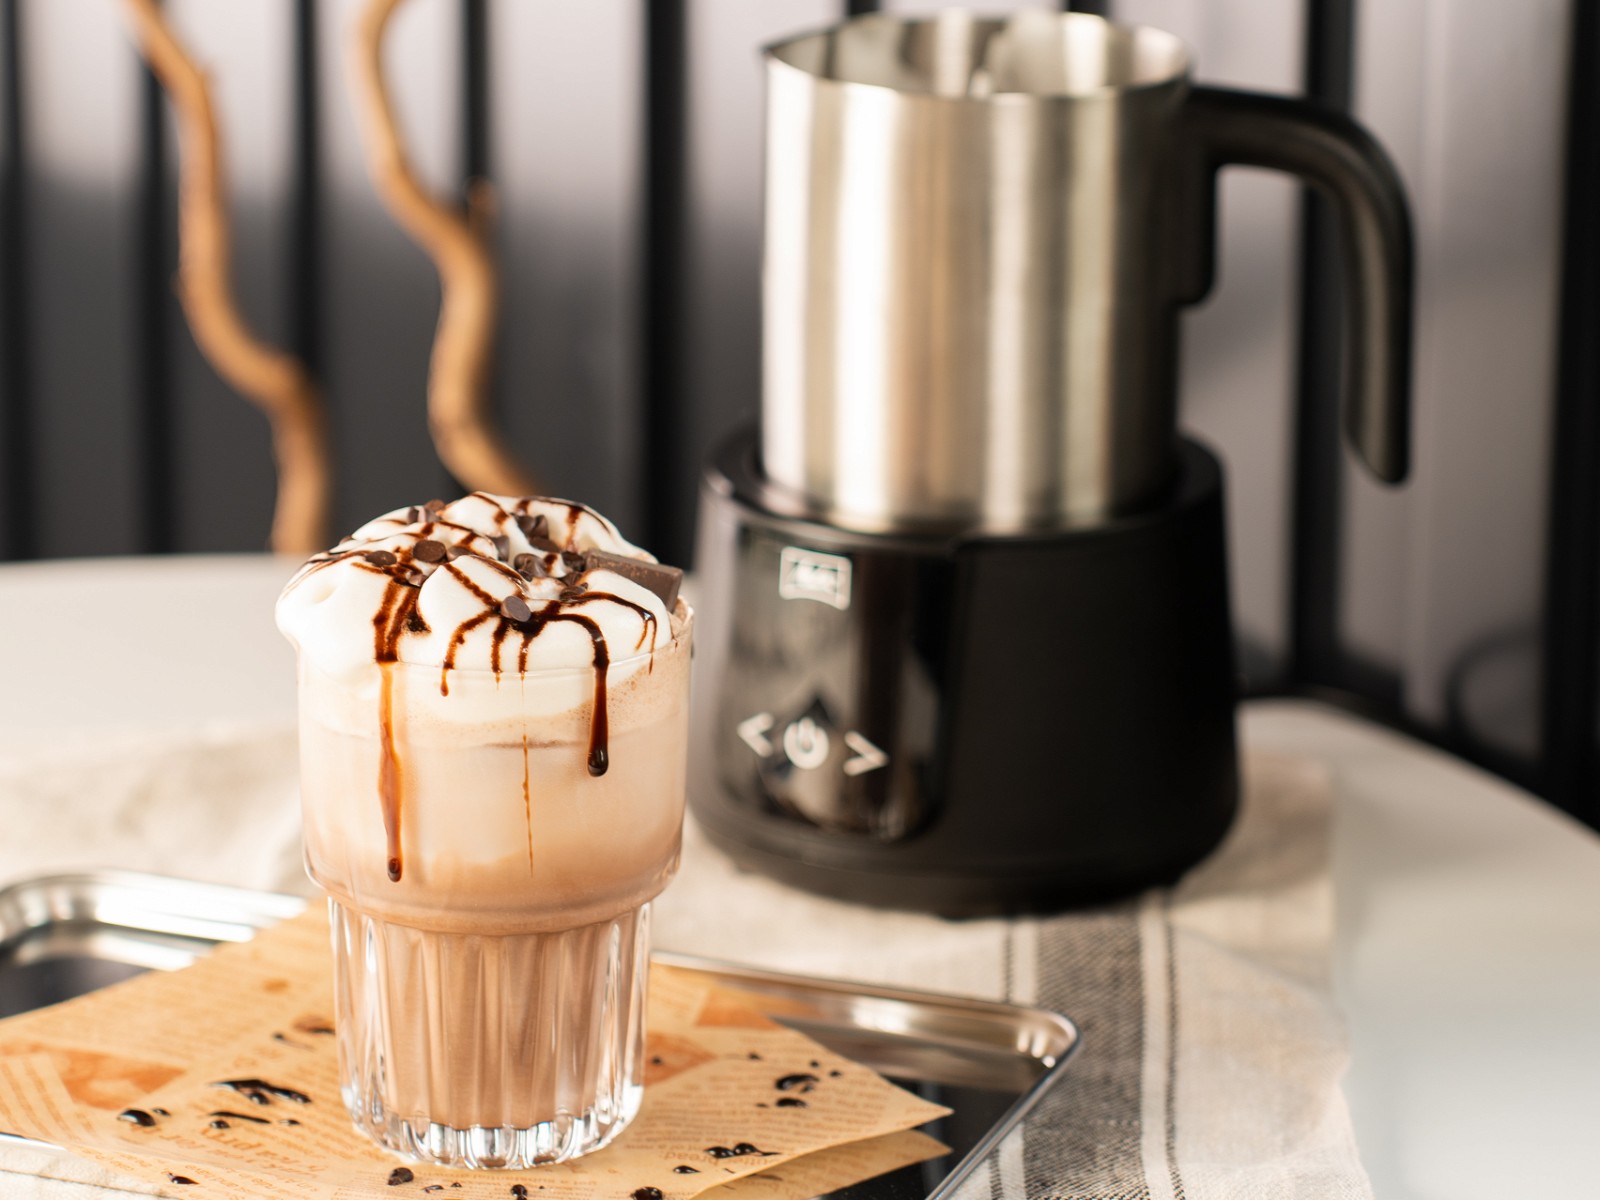 How To Make A Hot Chocolate Using InstaCuppa's Milk Frother Wand 